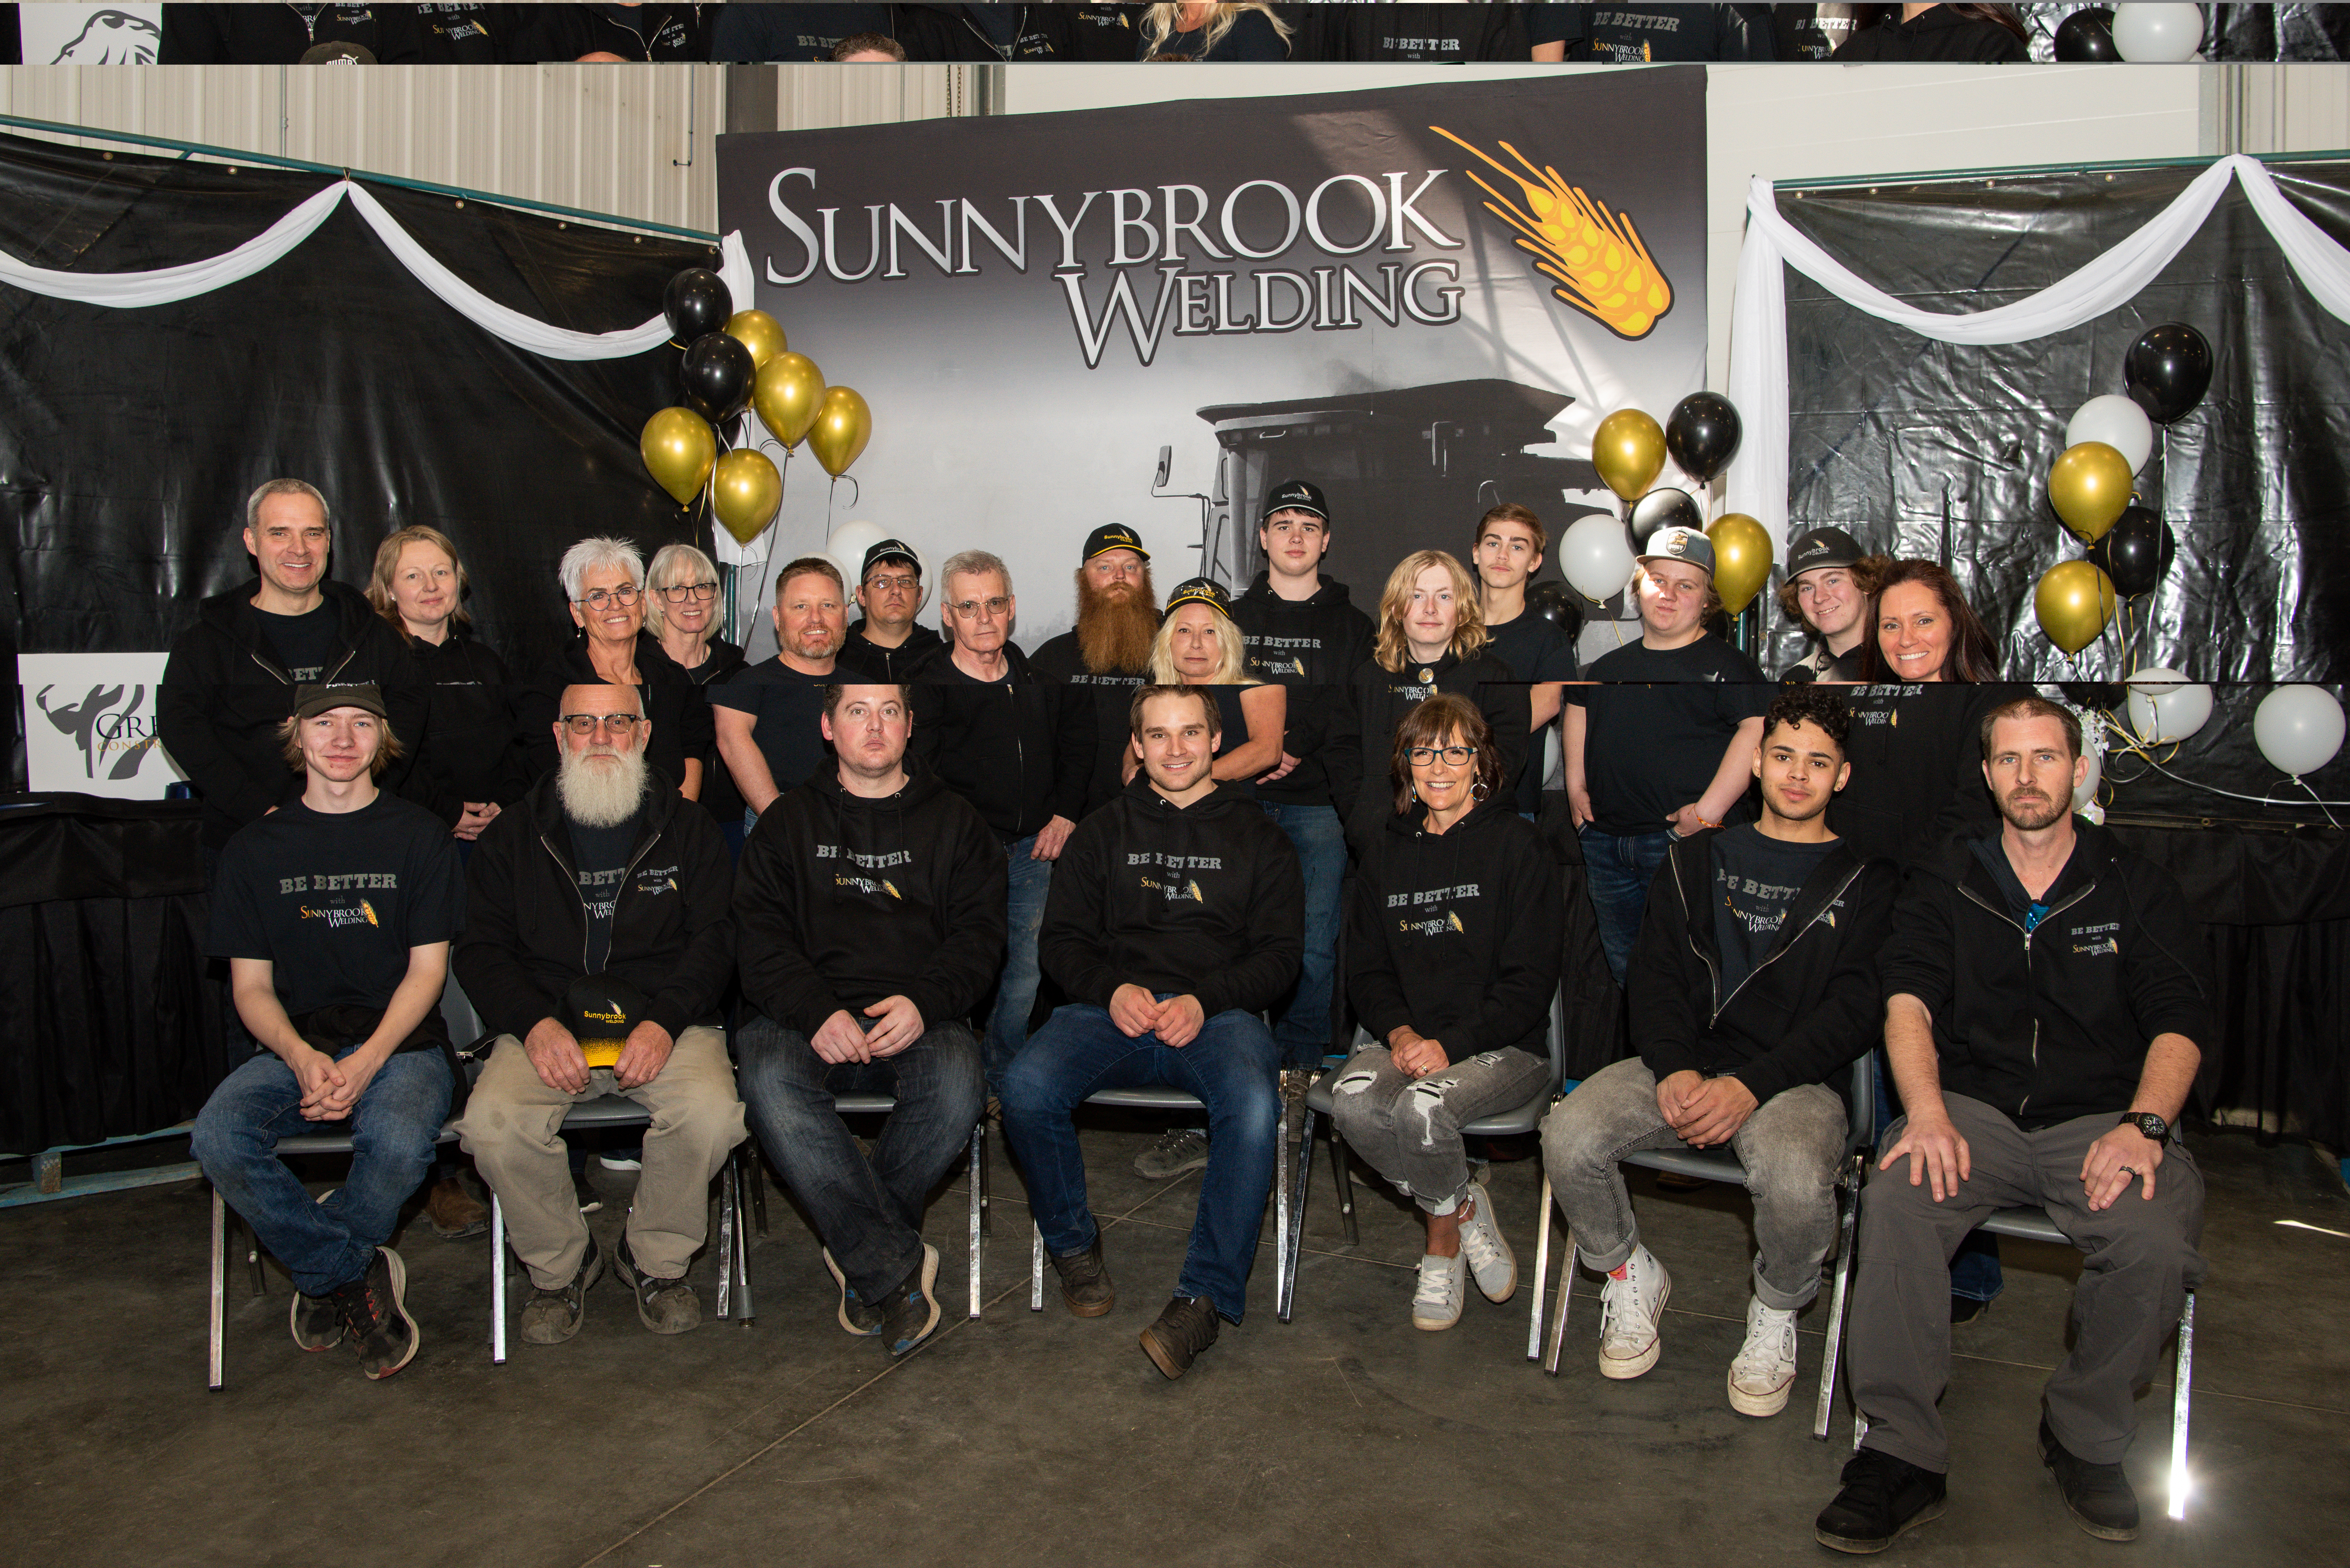 The Sunnybrook team: manufacturing and selling combine parts for the major brands